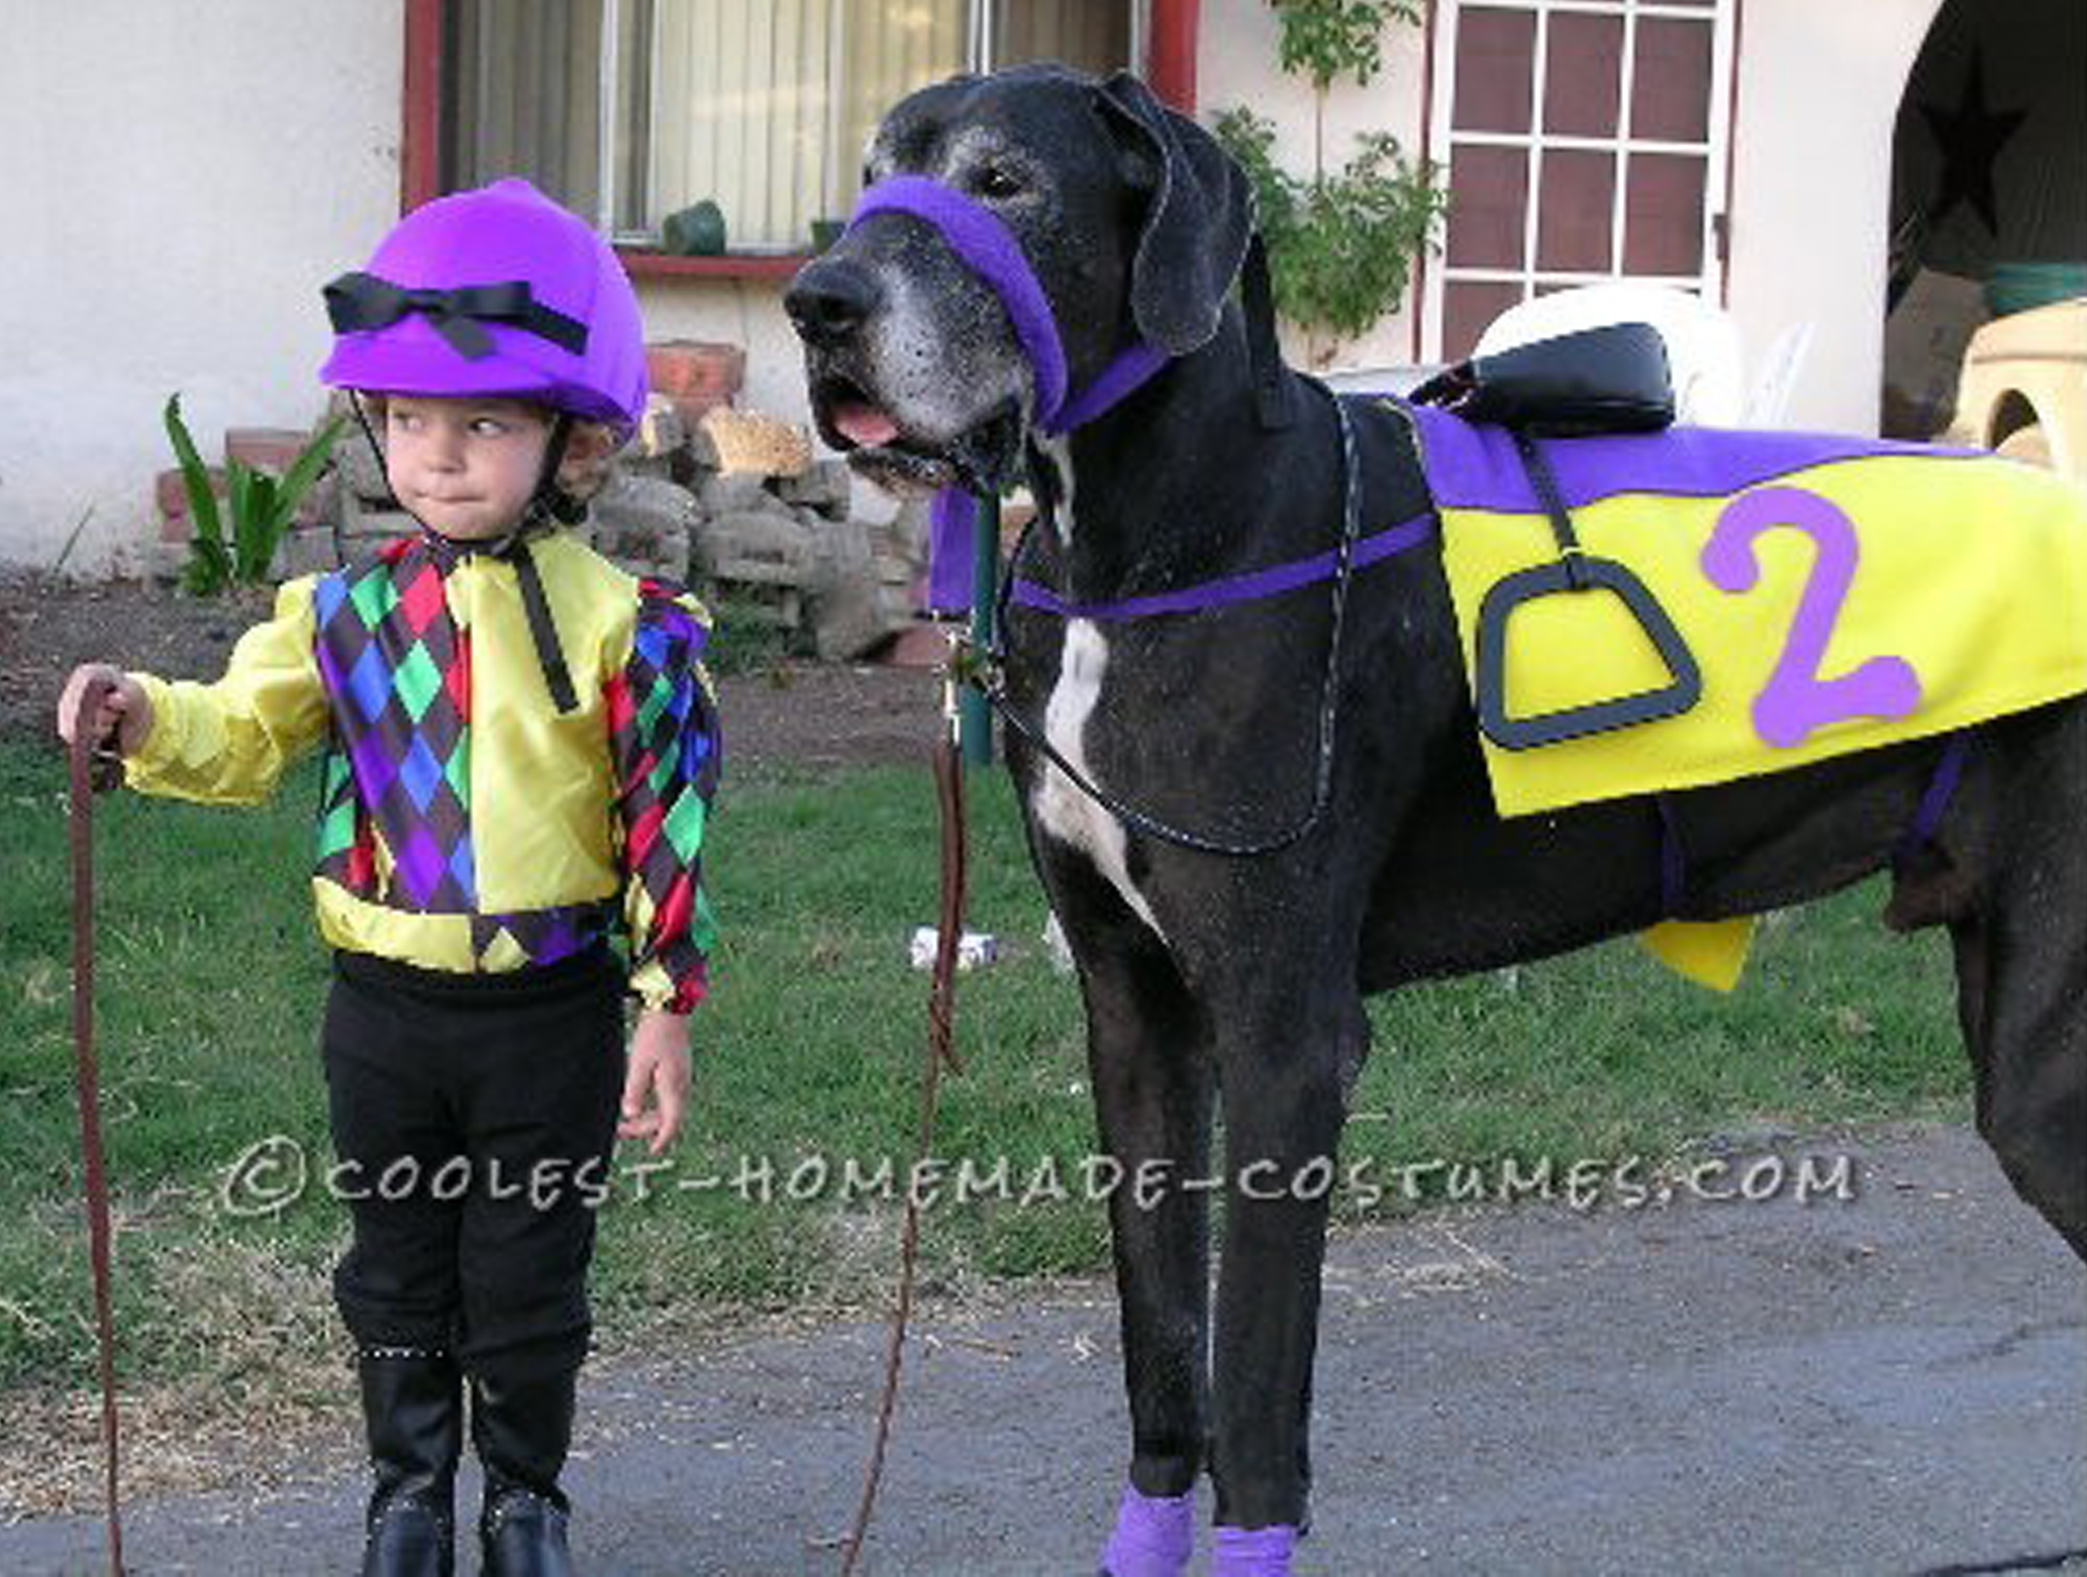 Image via Coolest Homemade Costumes